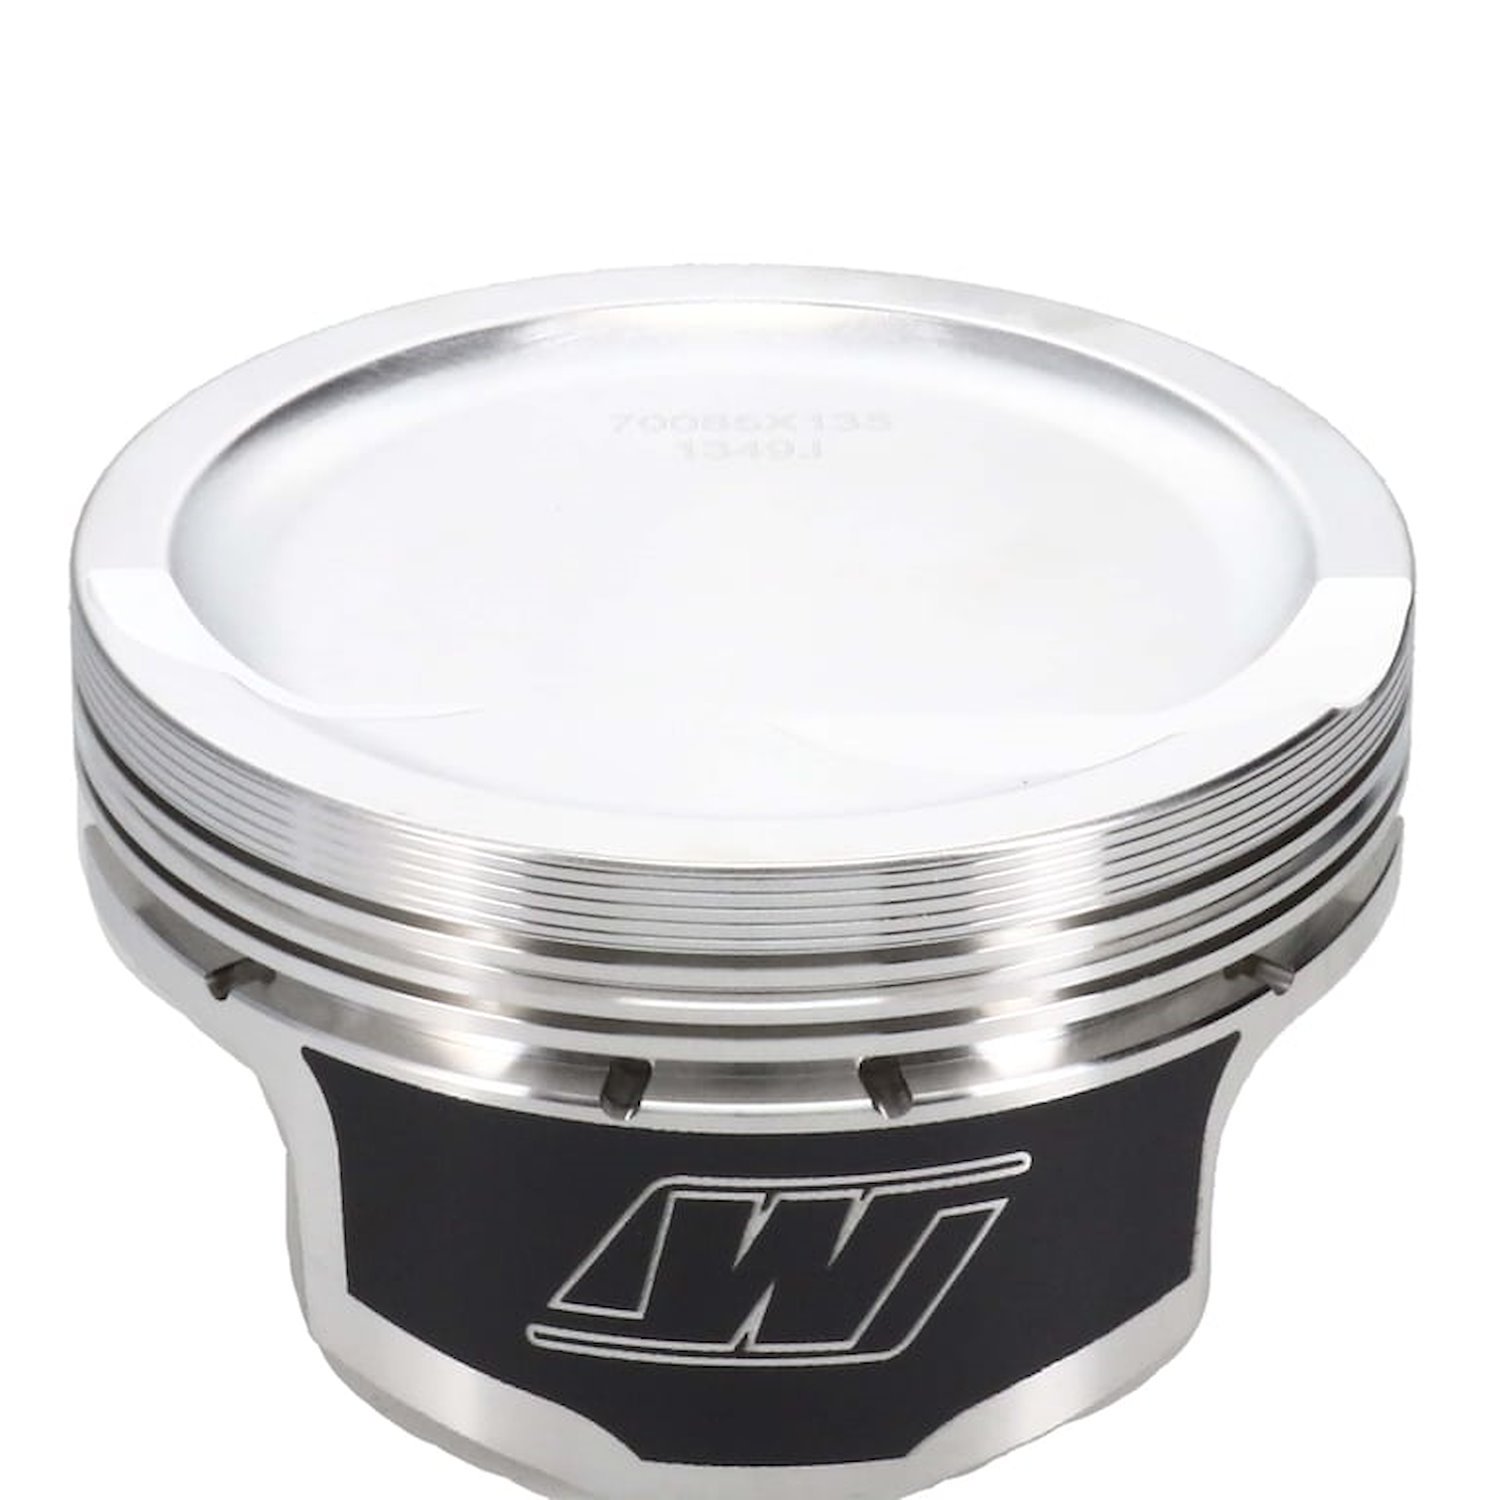 RED0085X185 RED-Series Piston Set, Chevy LS, 4.185 in. Bore, -20 cc Dish